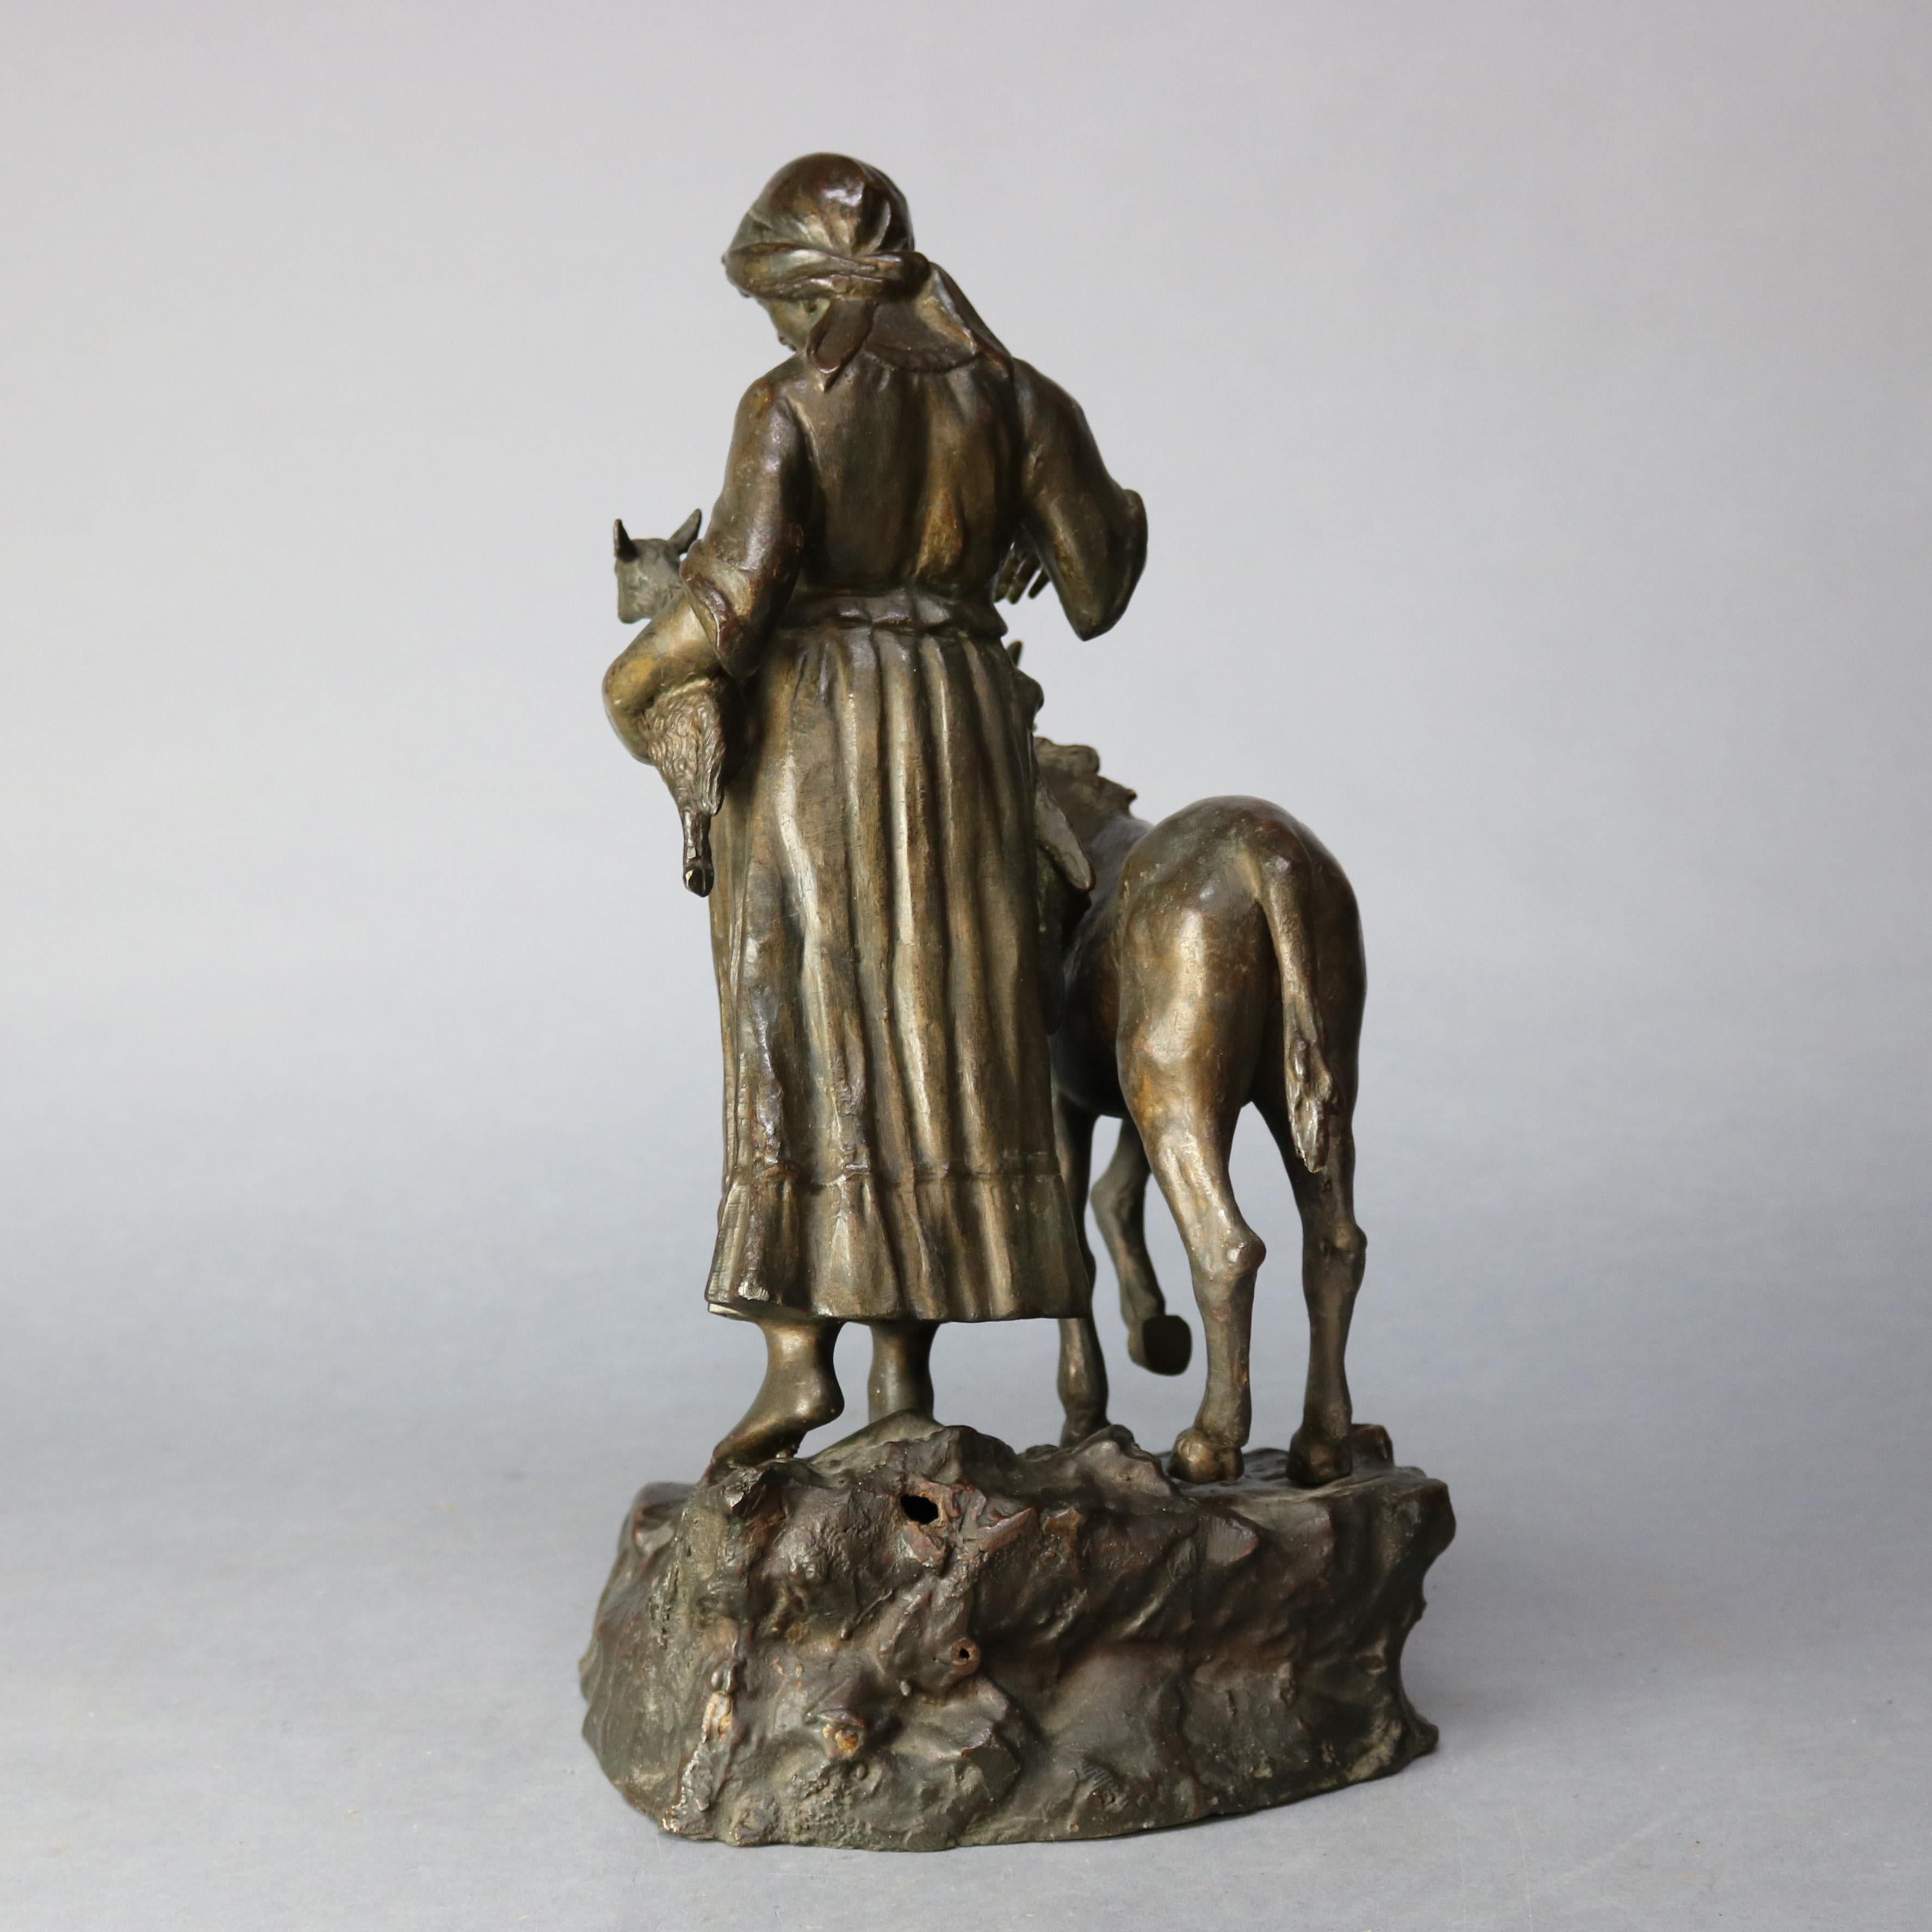 European Antique Bronze Sculpture Grouping of Girl with Lamb and Donkey, 19th Century